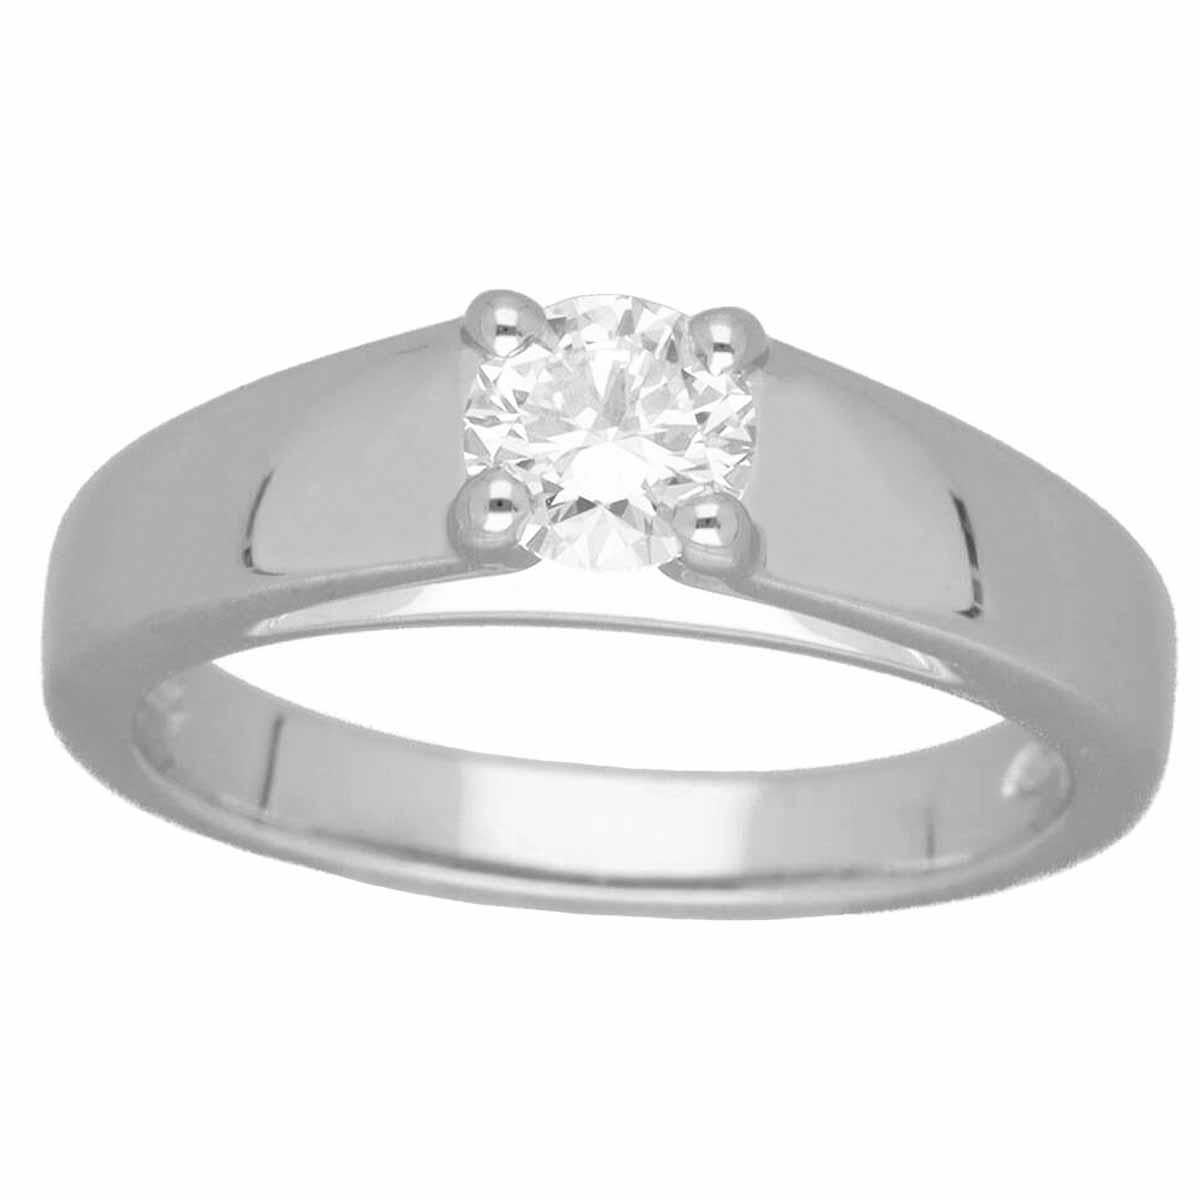 Brand:BVLGARI
Name:Glyph solitaire diamond ring
Material:1P diamond (D0.41ct F-VS1), PT950 platinum
Weight:7.3g（Approx)
Ring size(inch):British & Australian:J 1/2  /   US & Canada:4 3/4 /  French & Russian:49 /  German:15 3/4  /  Japanese: 9 